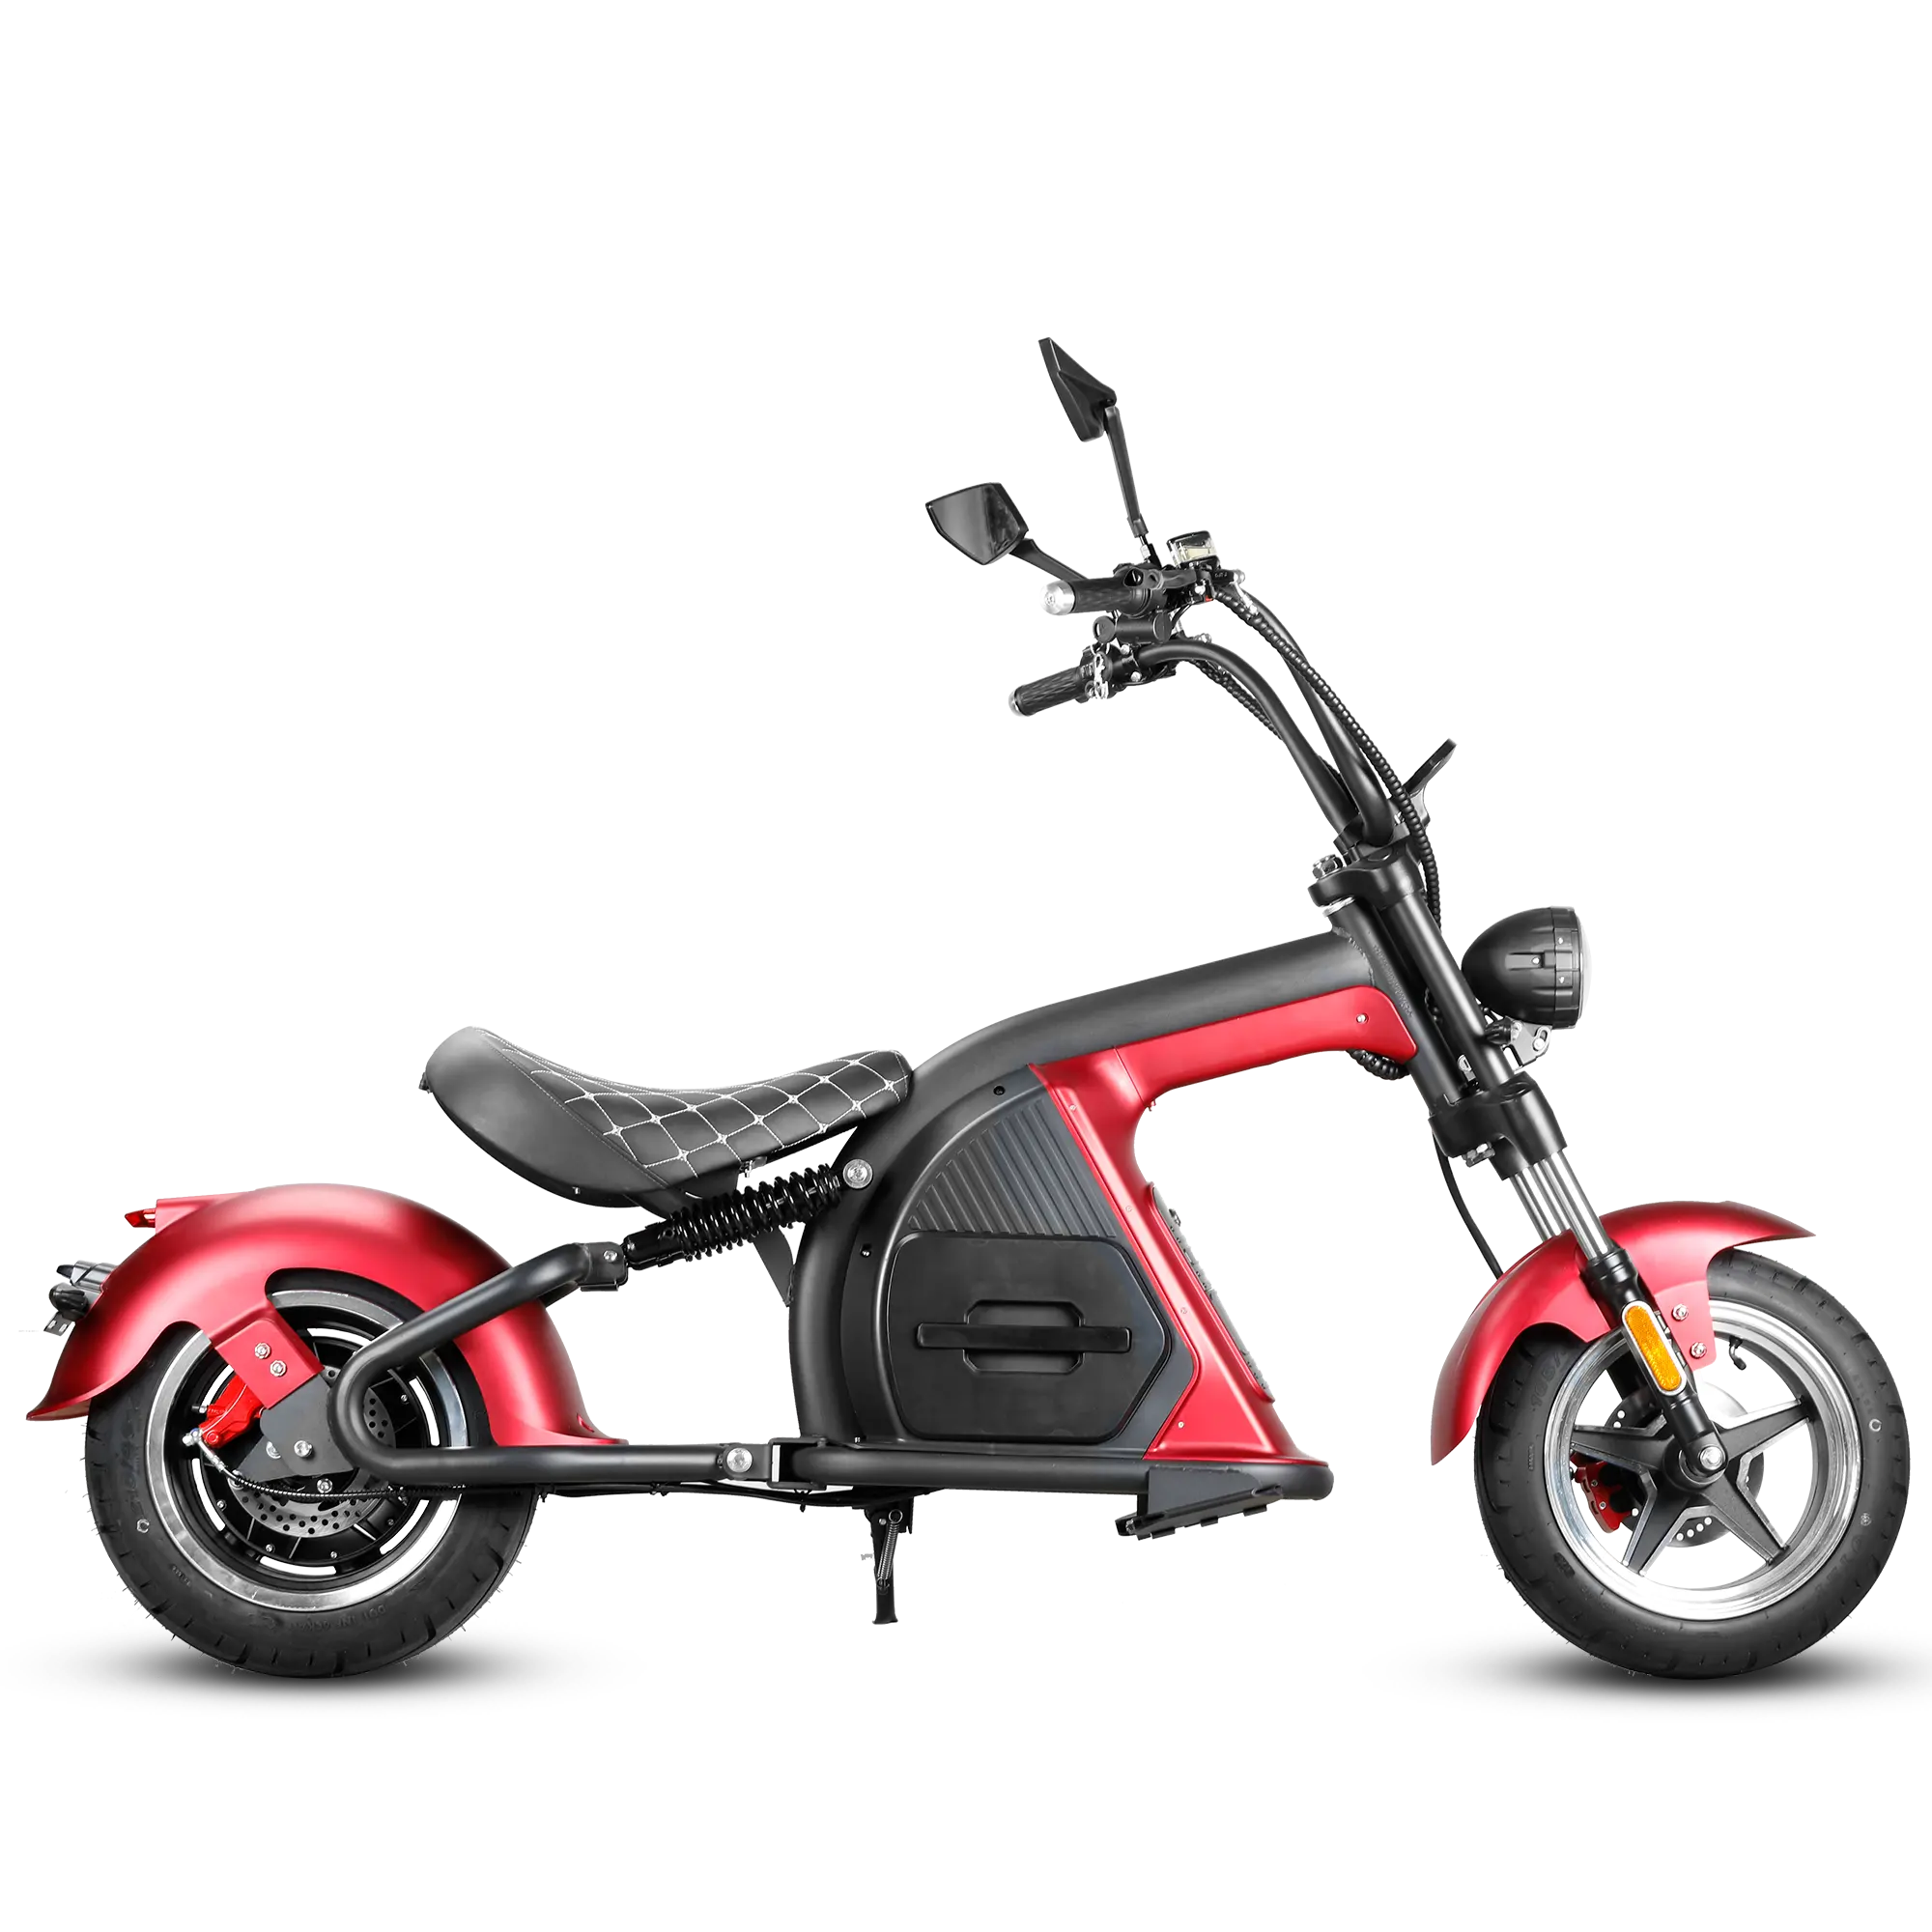 UNIEBIKE DOT Approved M8 Electric Motorcycle for Adults 37MPH 2000W Motor 60V 30Ah Lithium Battery Chopper Electric Scooter